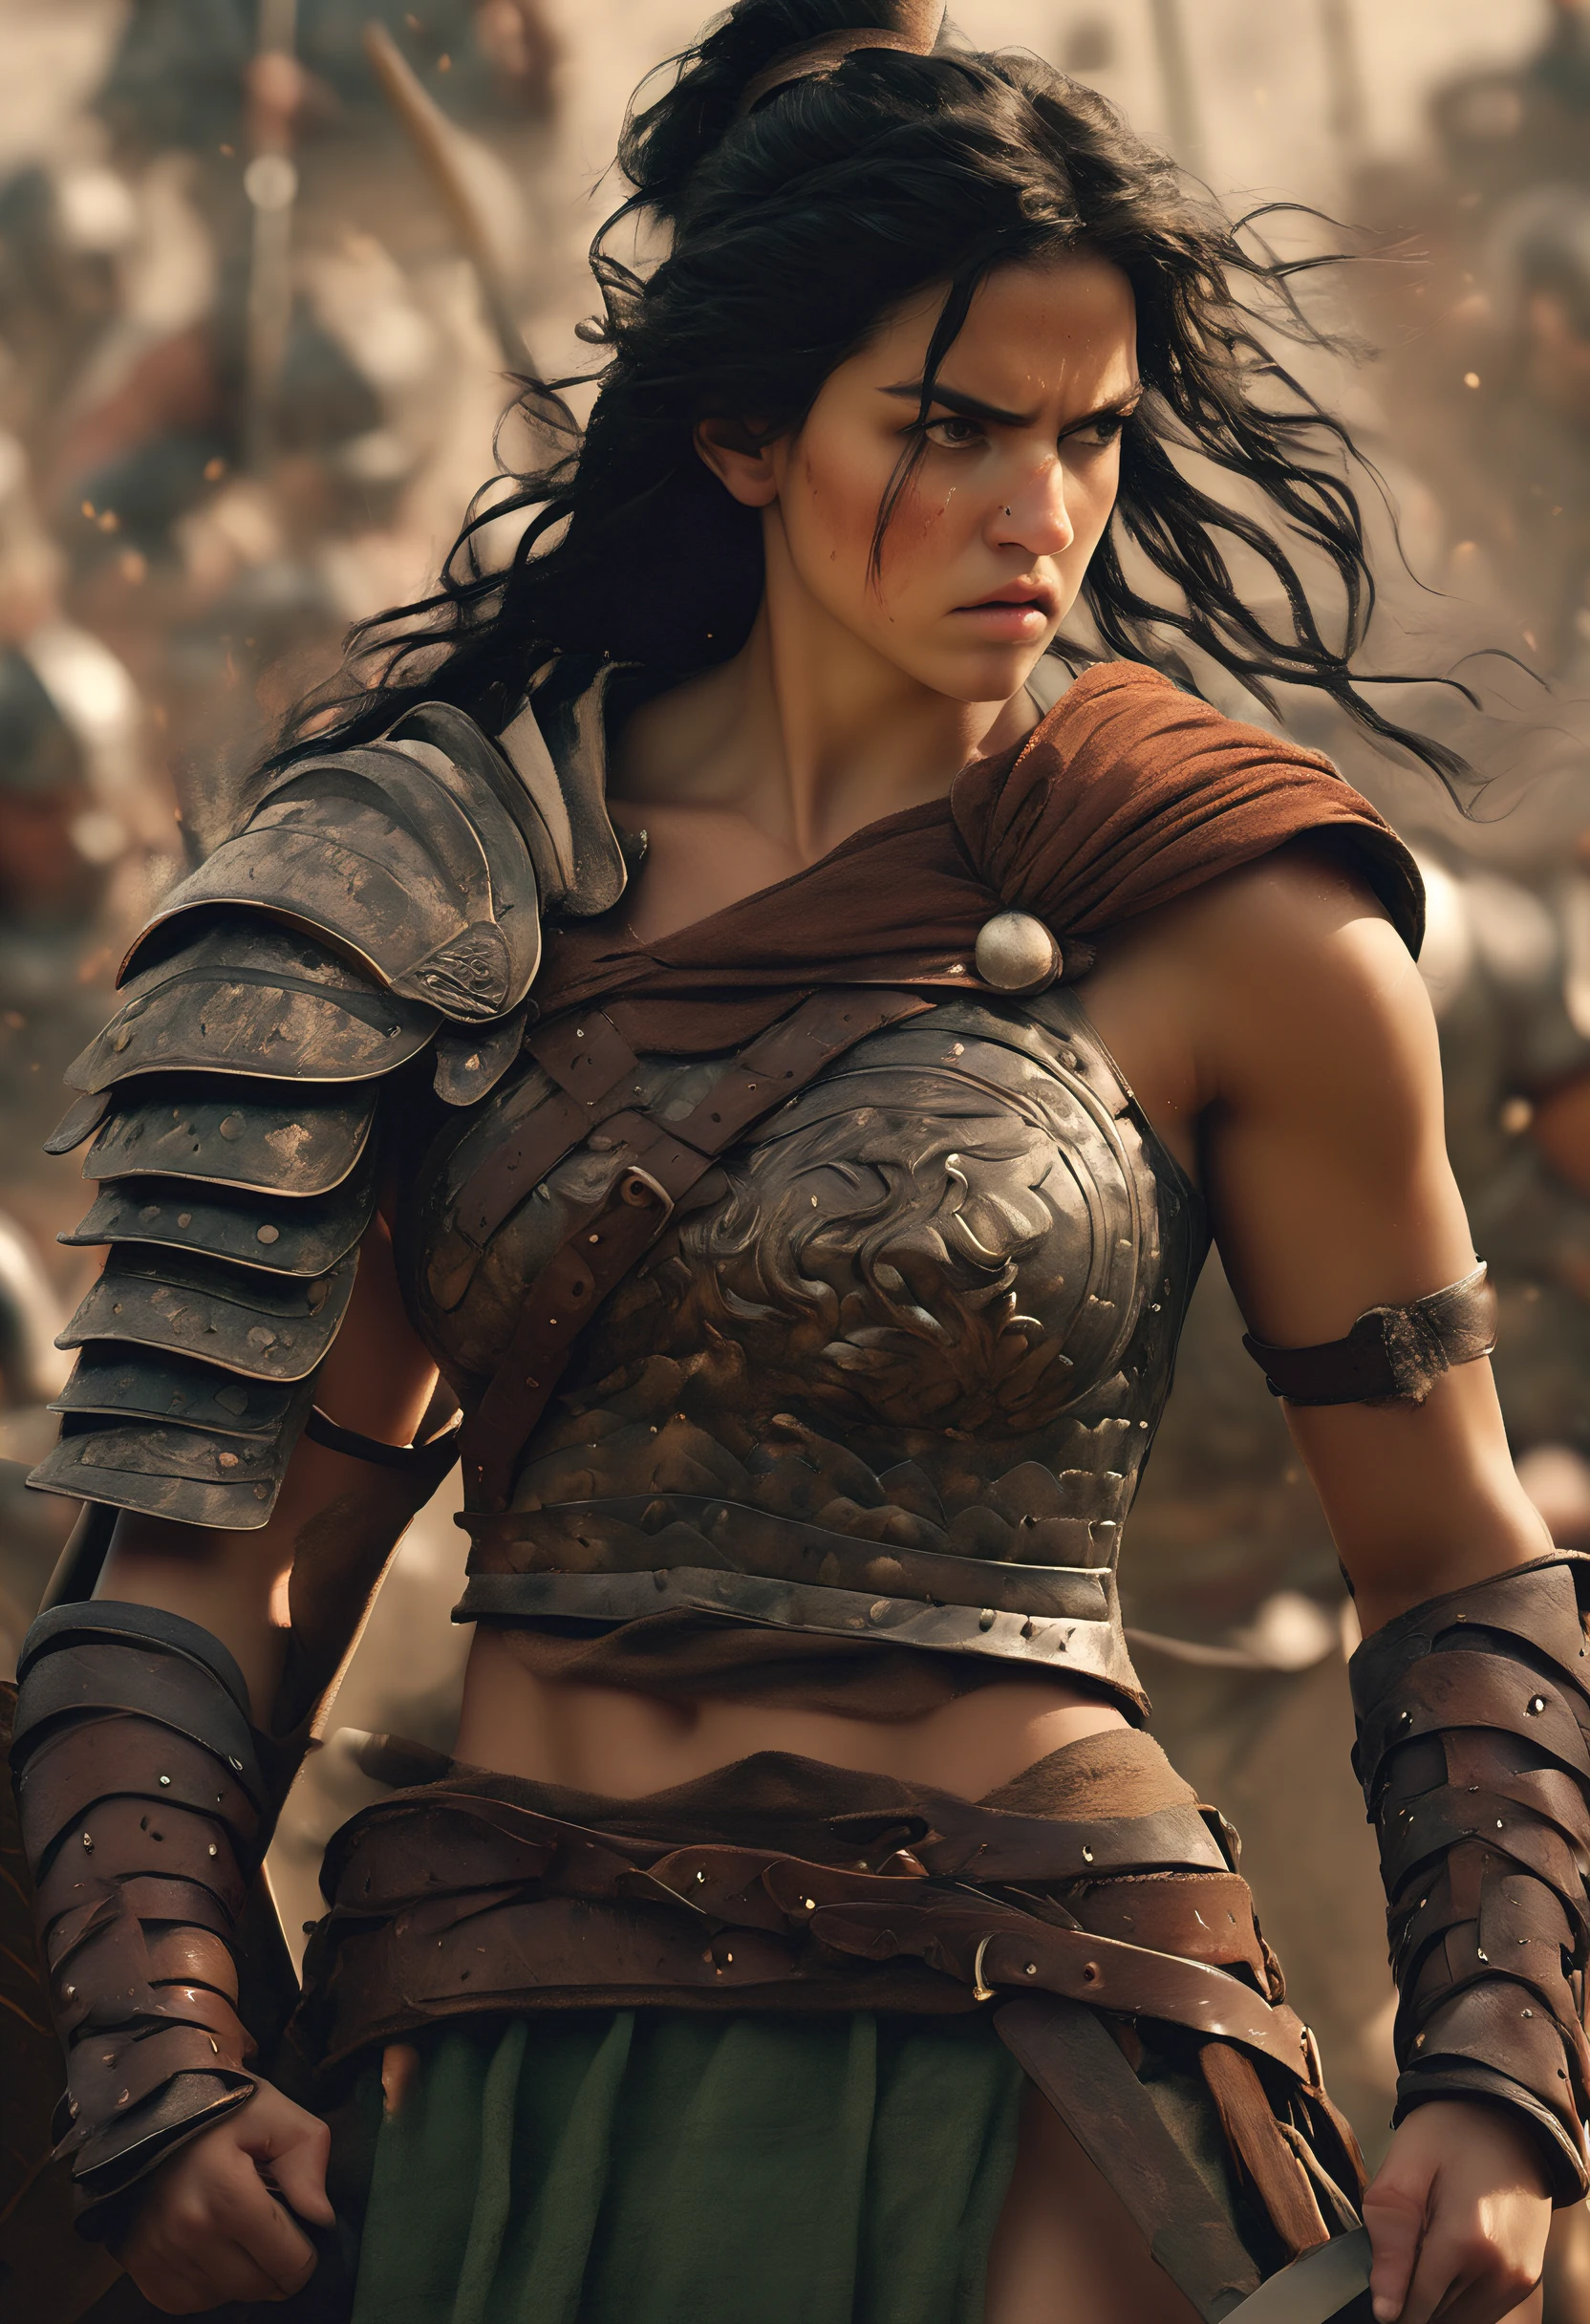 (masterpiece, high quality, best quality), beautiful, hd, realistic, perfect lighting, detailed face, detailed body, 1 girl, solo, black hair, green eyes, long black hair, brown and worn leather clothing gladiator style: 1.4), leather breastplate, 1 wooden spear in hands, war battle background, gladiator style, fit woman, robust, angry look